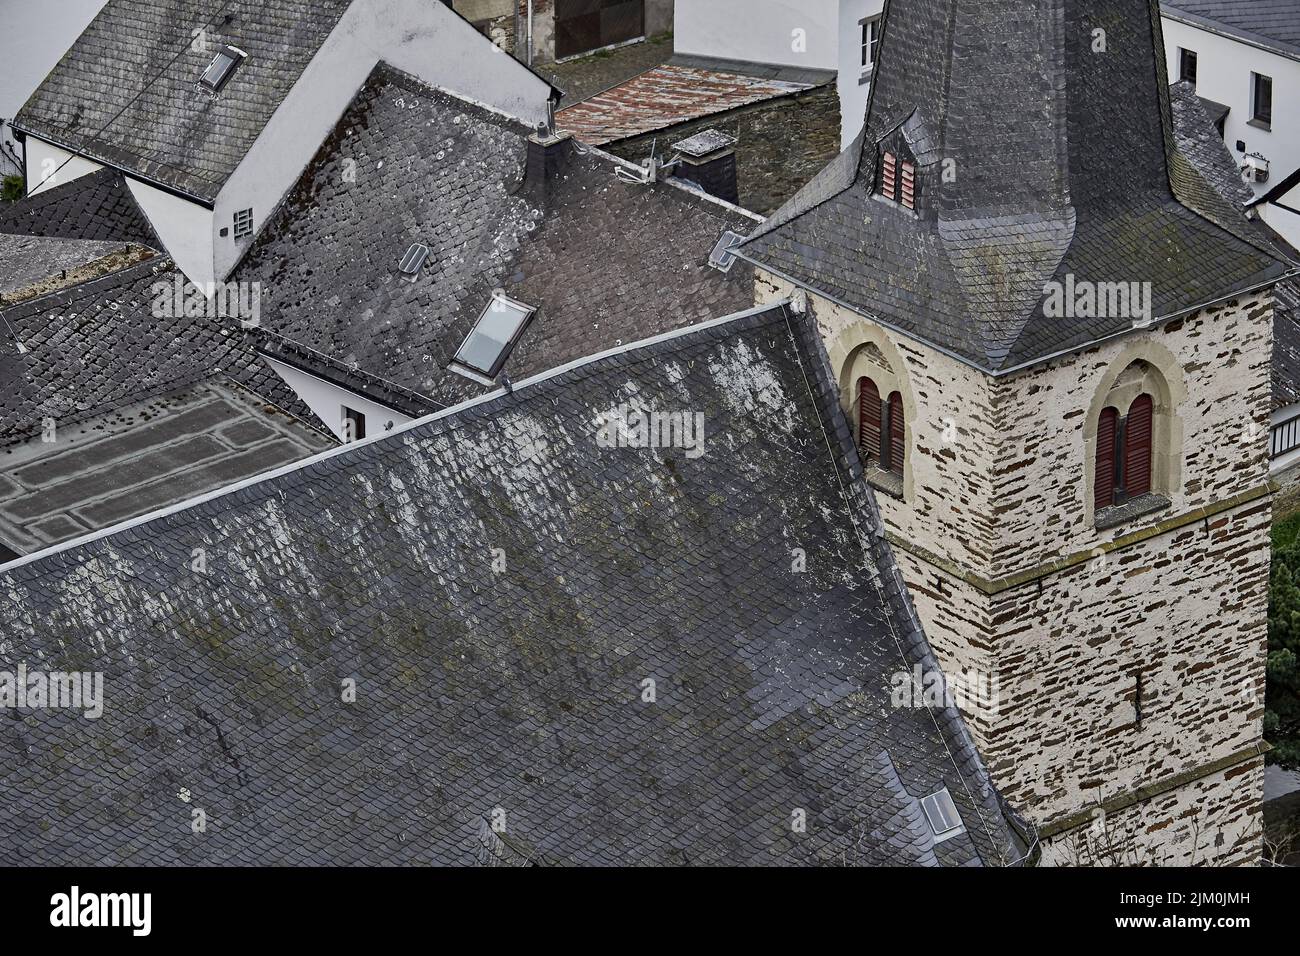 An aerial view of the roof of the Roman Catholic parish church of the Holy Trinity in Monreal, Germany Stock Photo